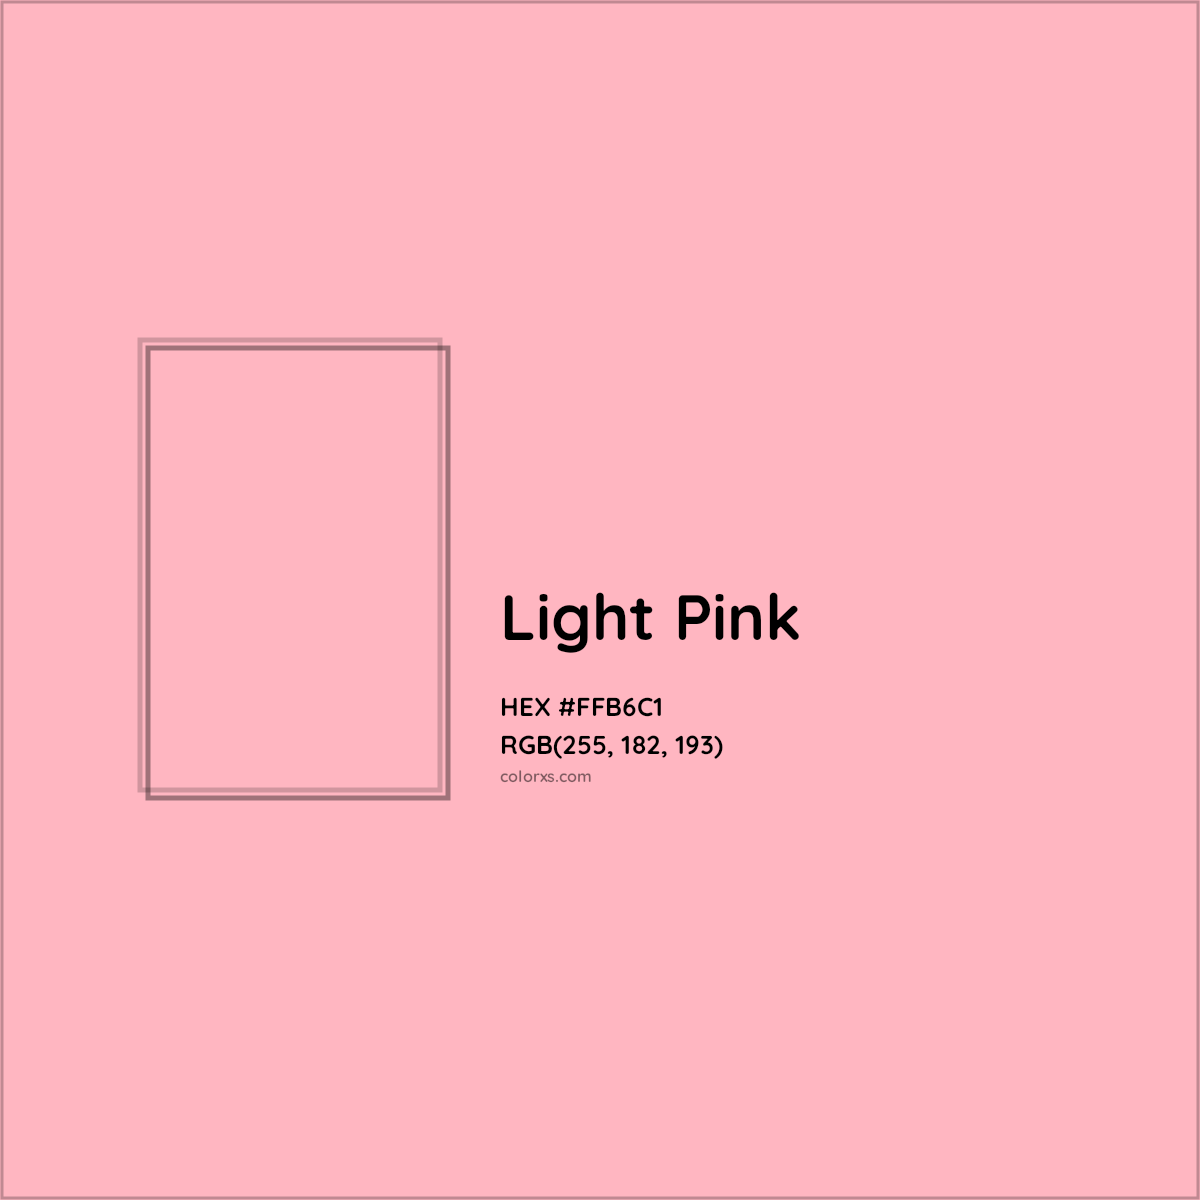 About Light Pink - Color codes, similar colors and paints